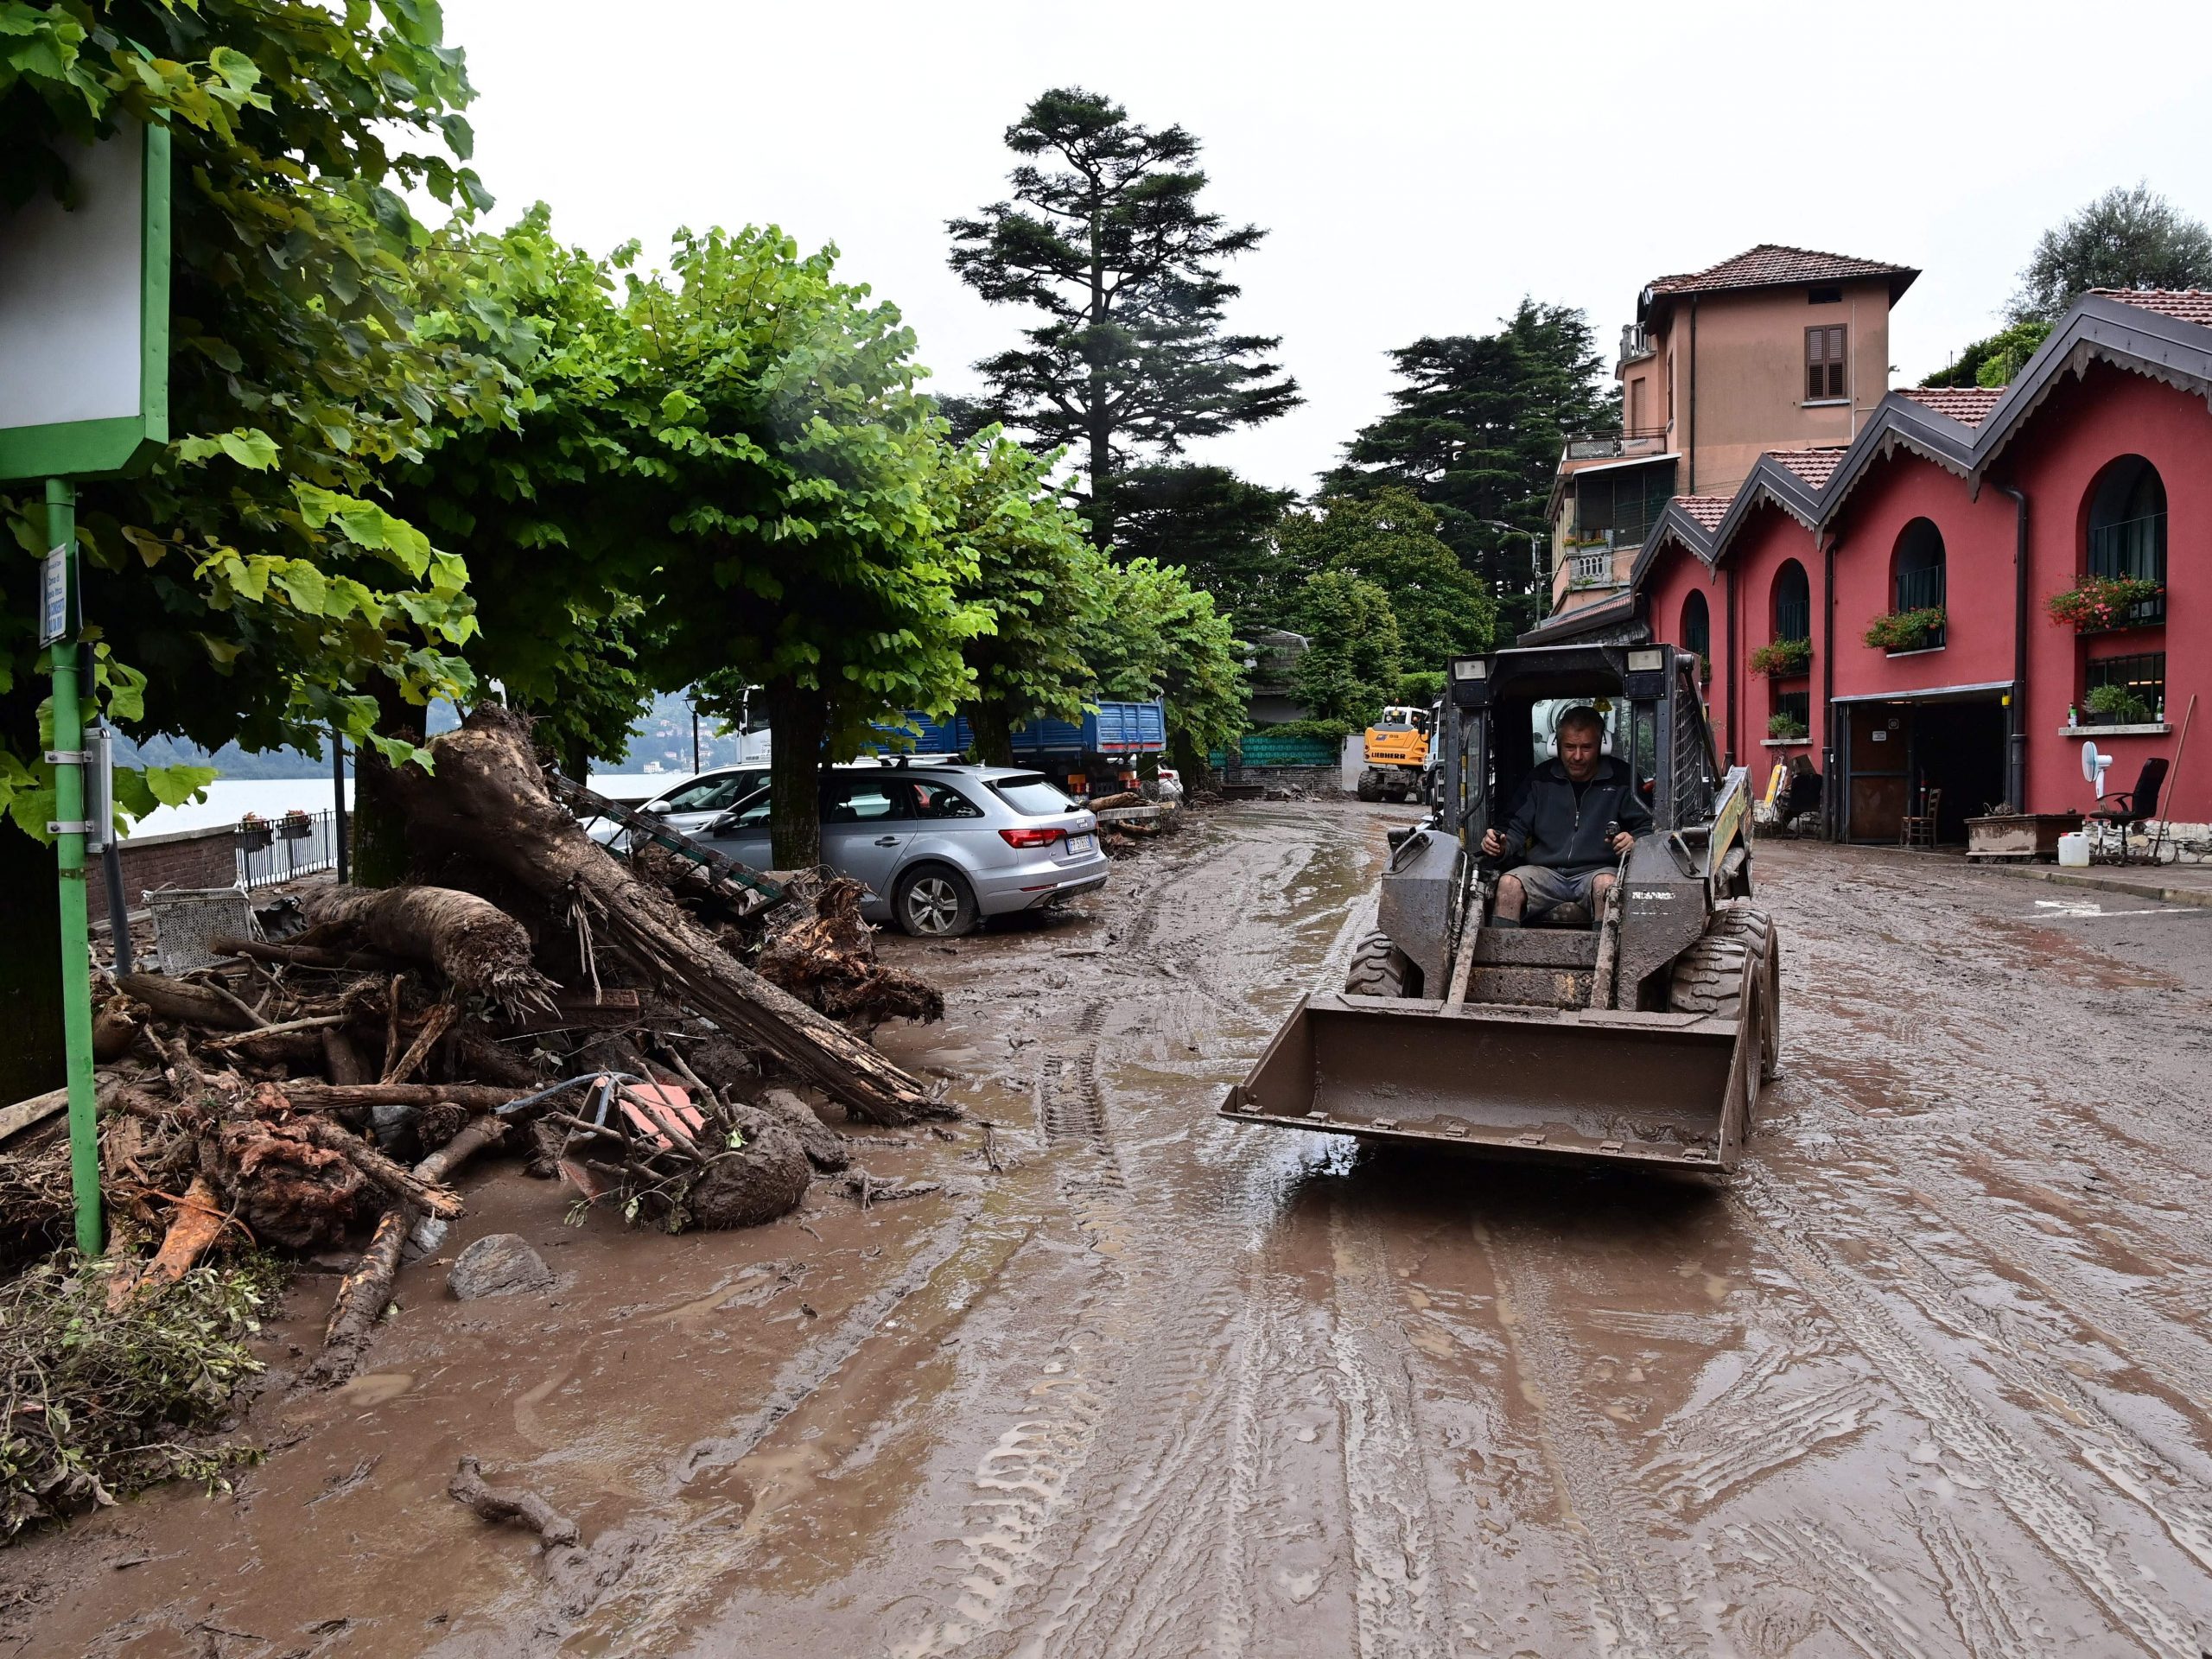 A man uses a bulldozer to clear debris on a muddy, damaged street in Laglio, Italy, near Lake Como, following extreme rainfall that caused flooding and landslides.